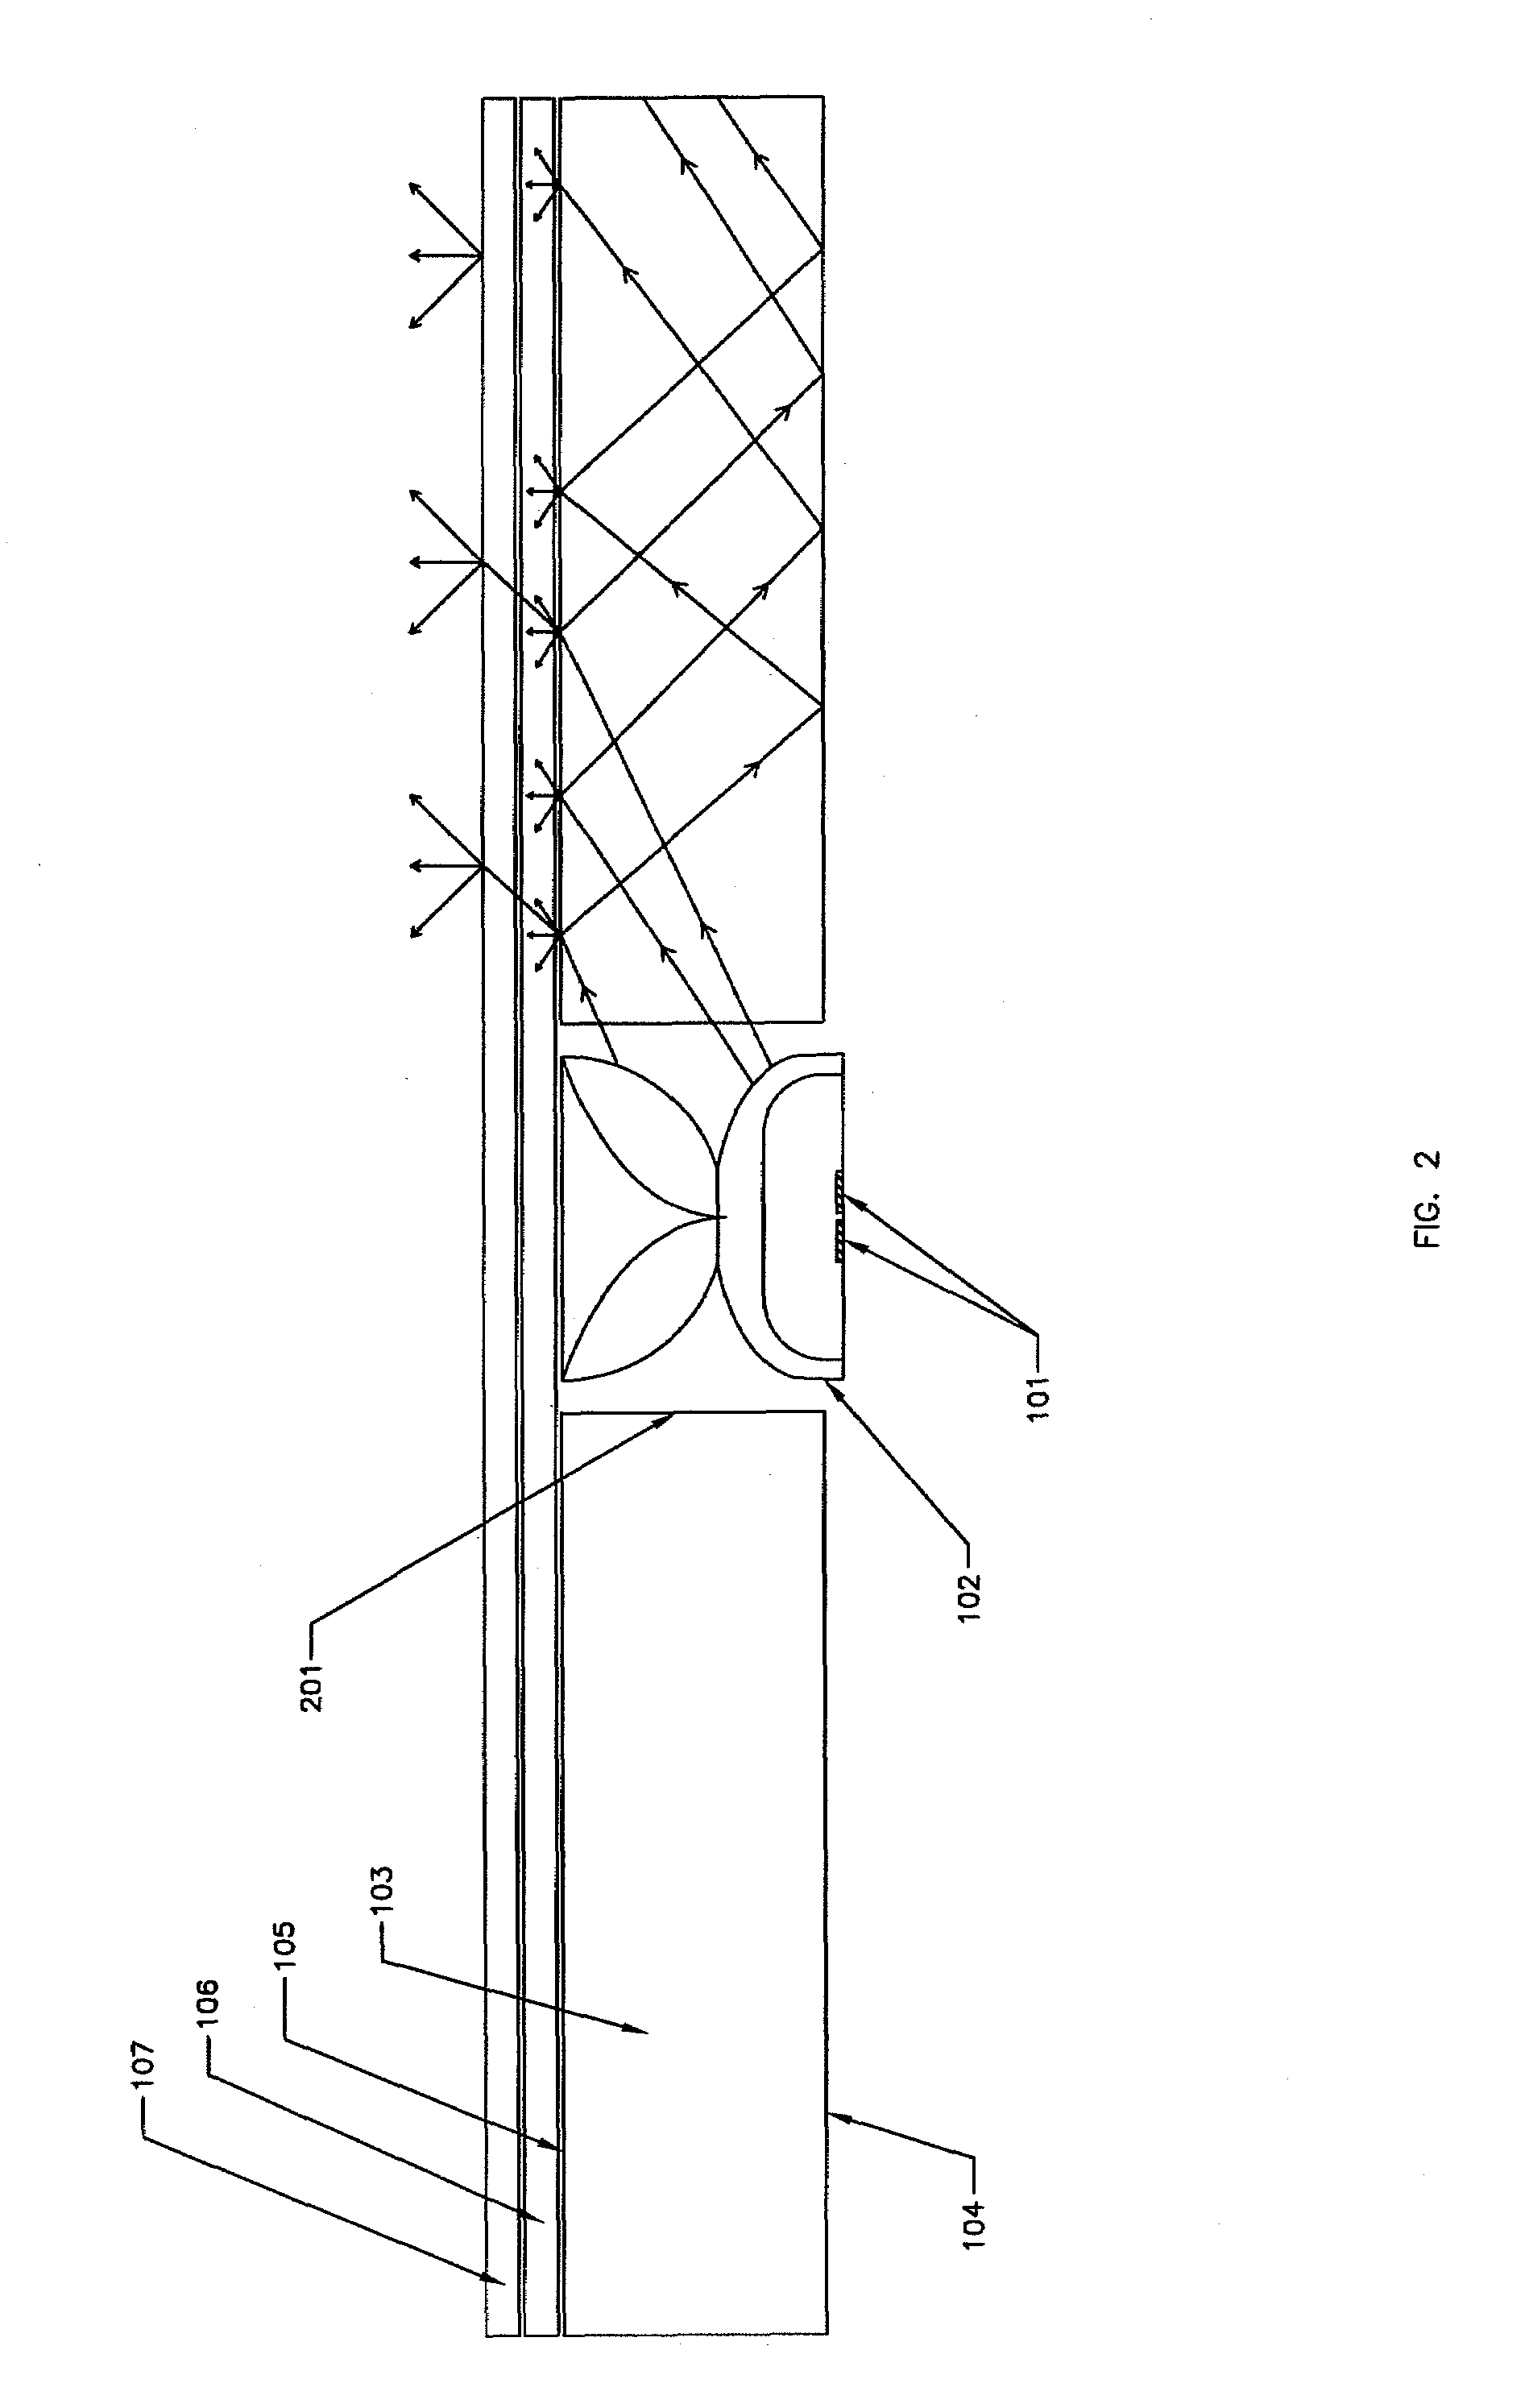 Solid-state lateral emitting optical system